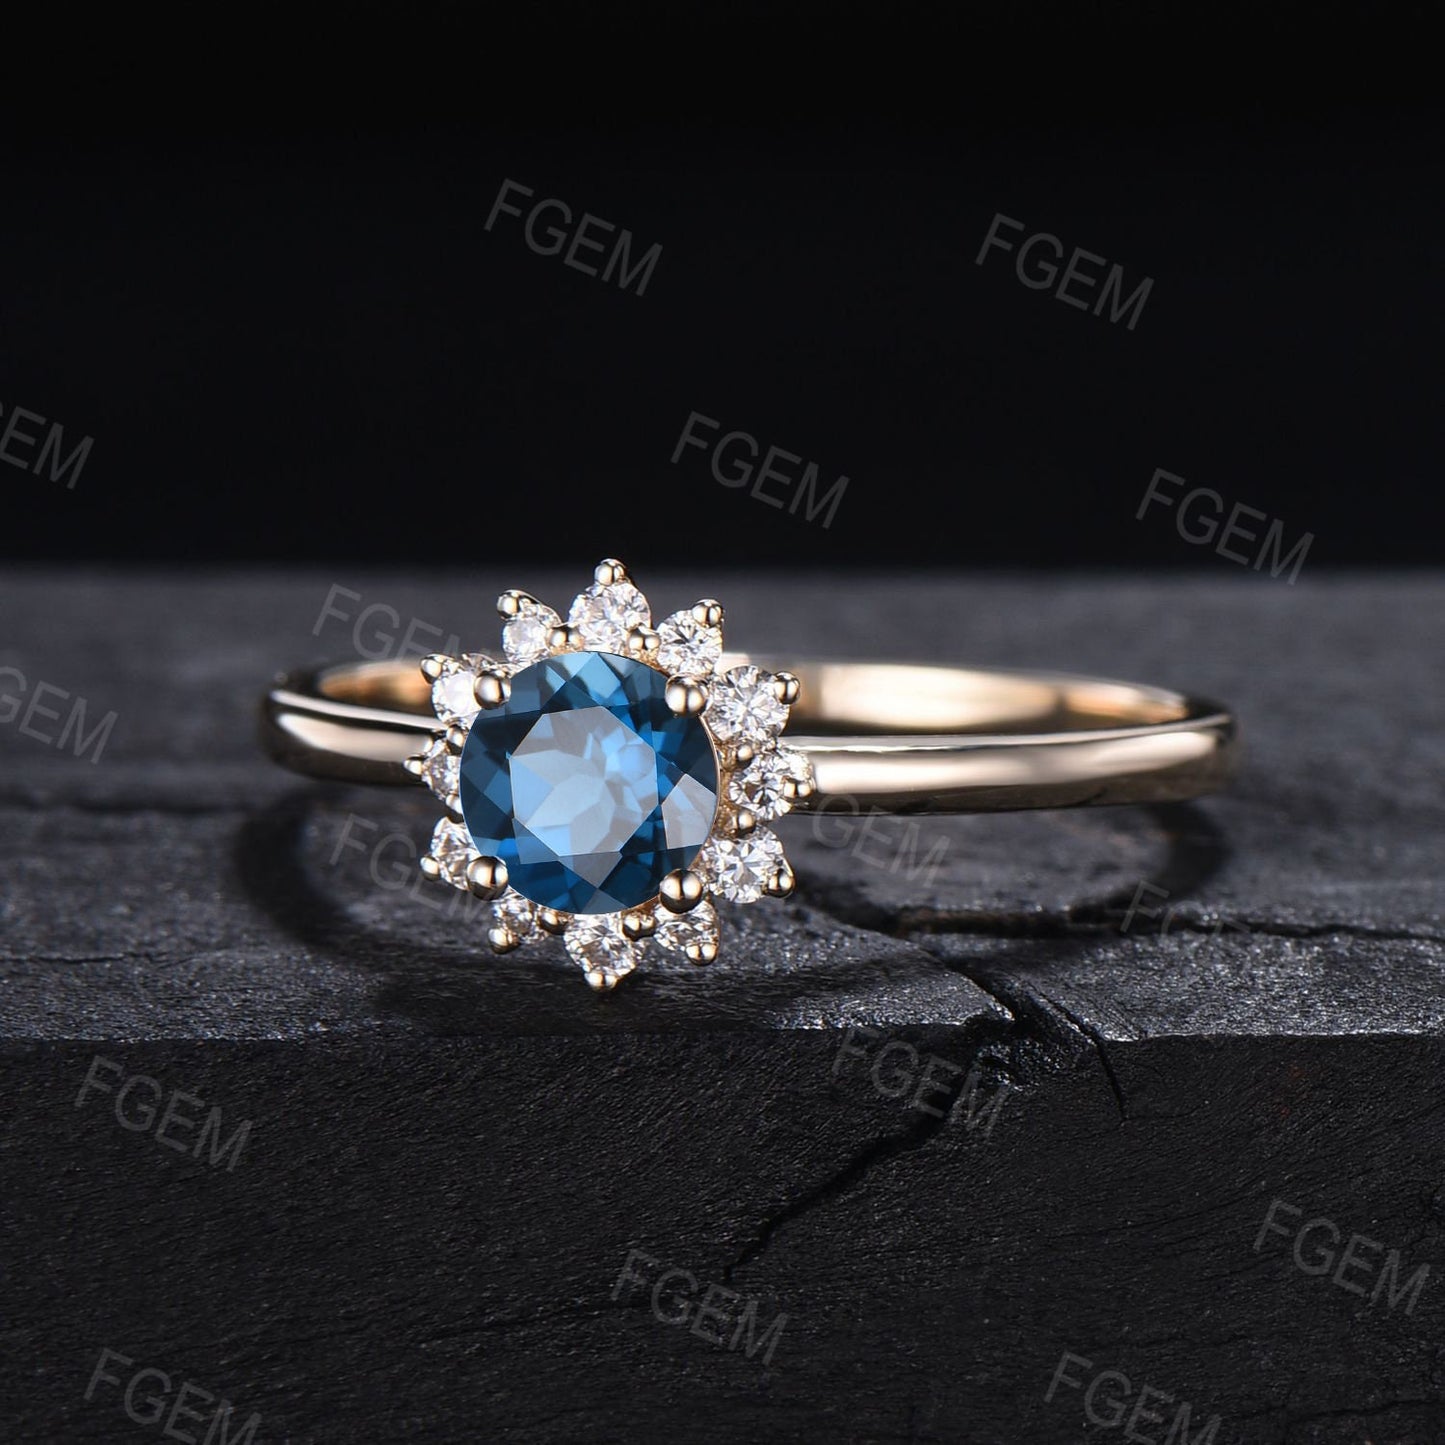 Natural London Blue Topaz Ring Halo Engagement Rings Flower Cluster Wedding Ring December Birthstone Gift Unique Anniversary/Birthday Gift